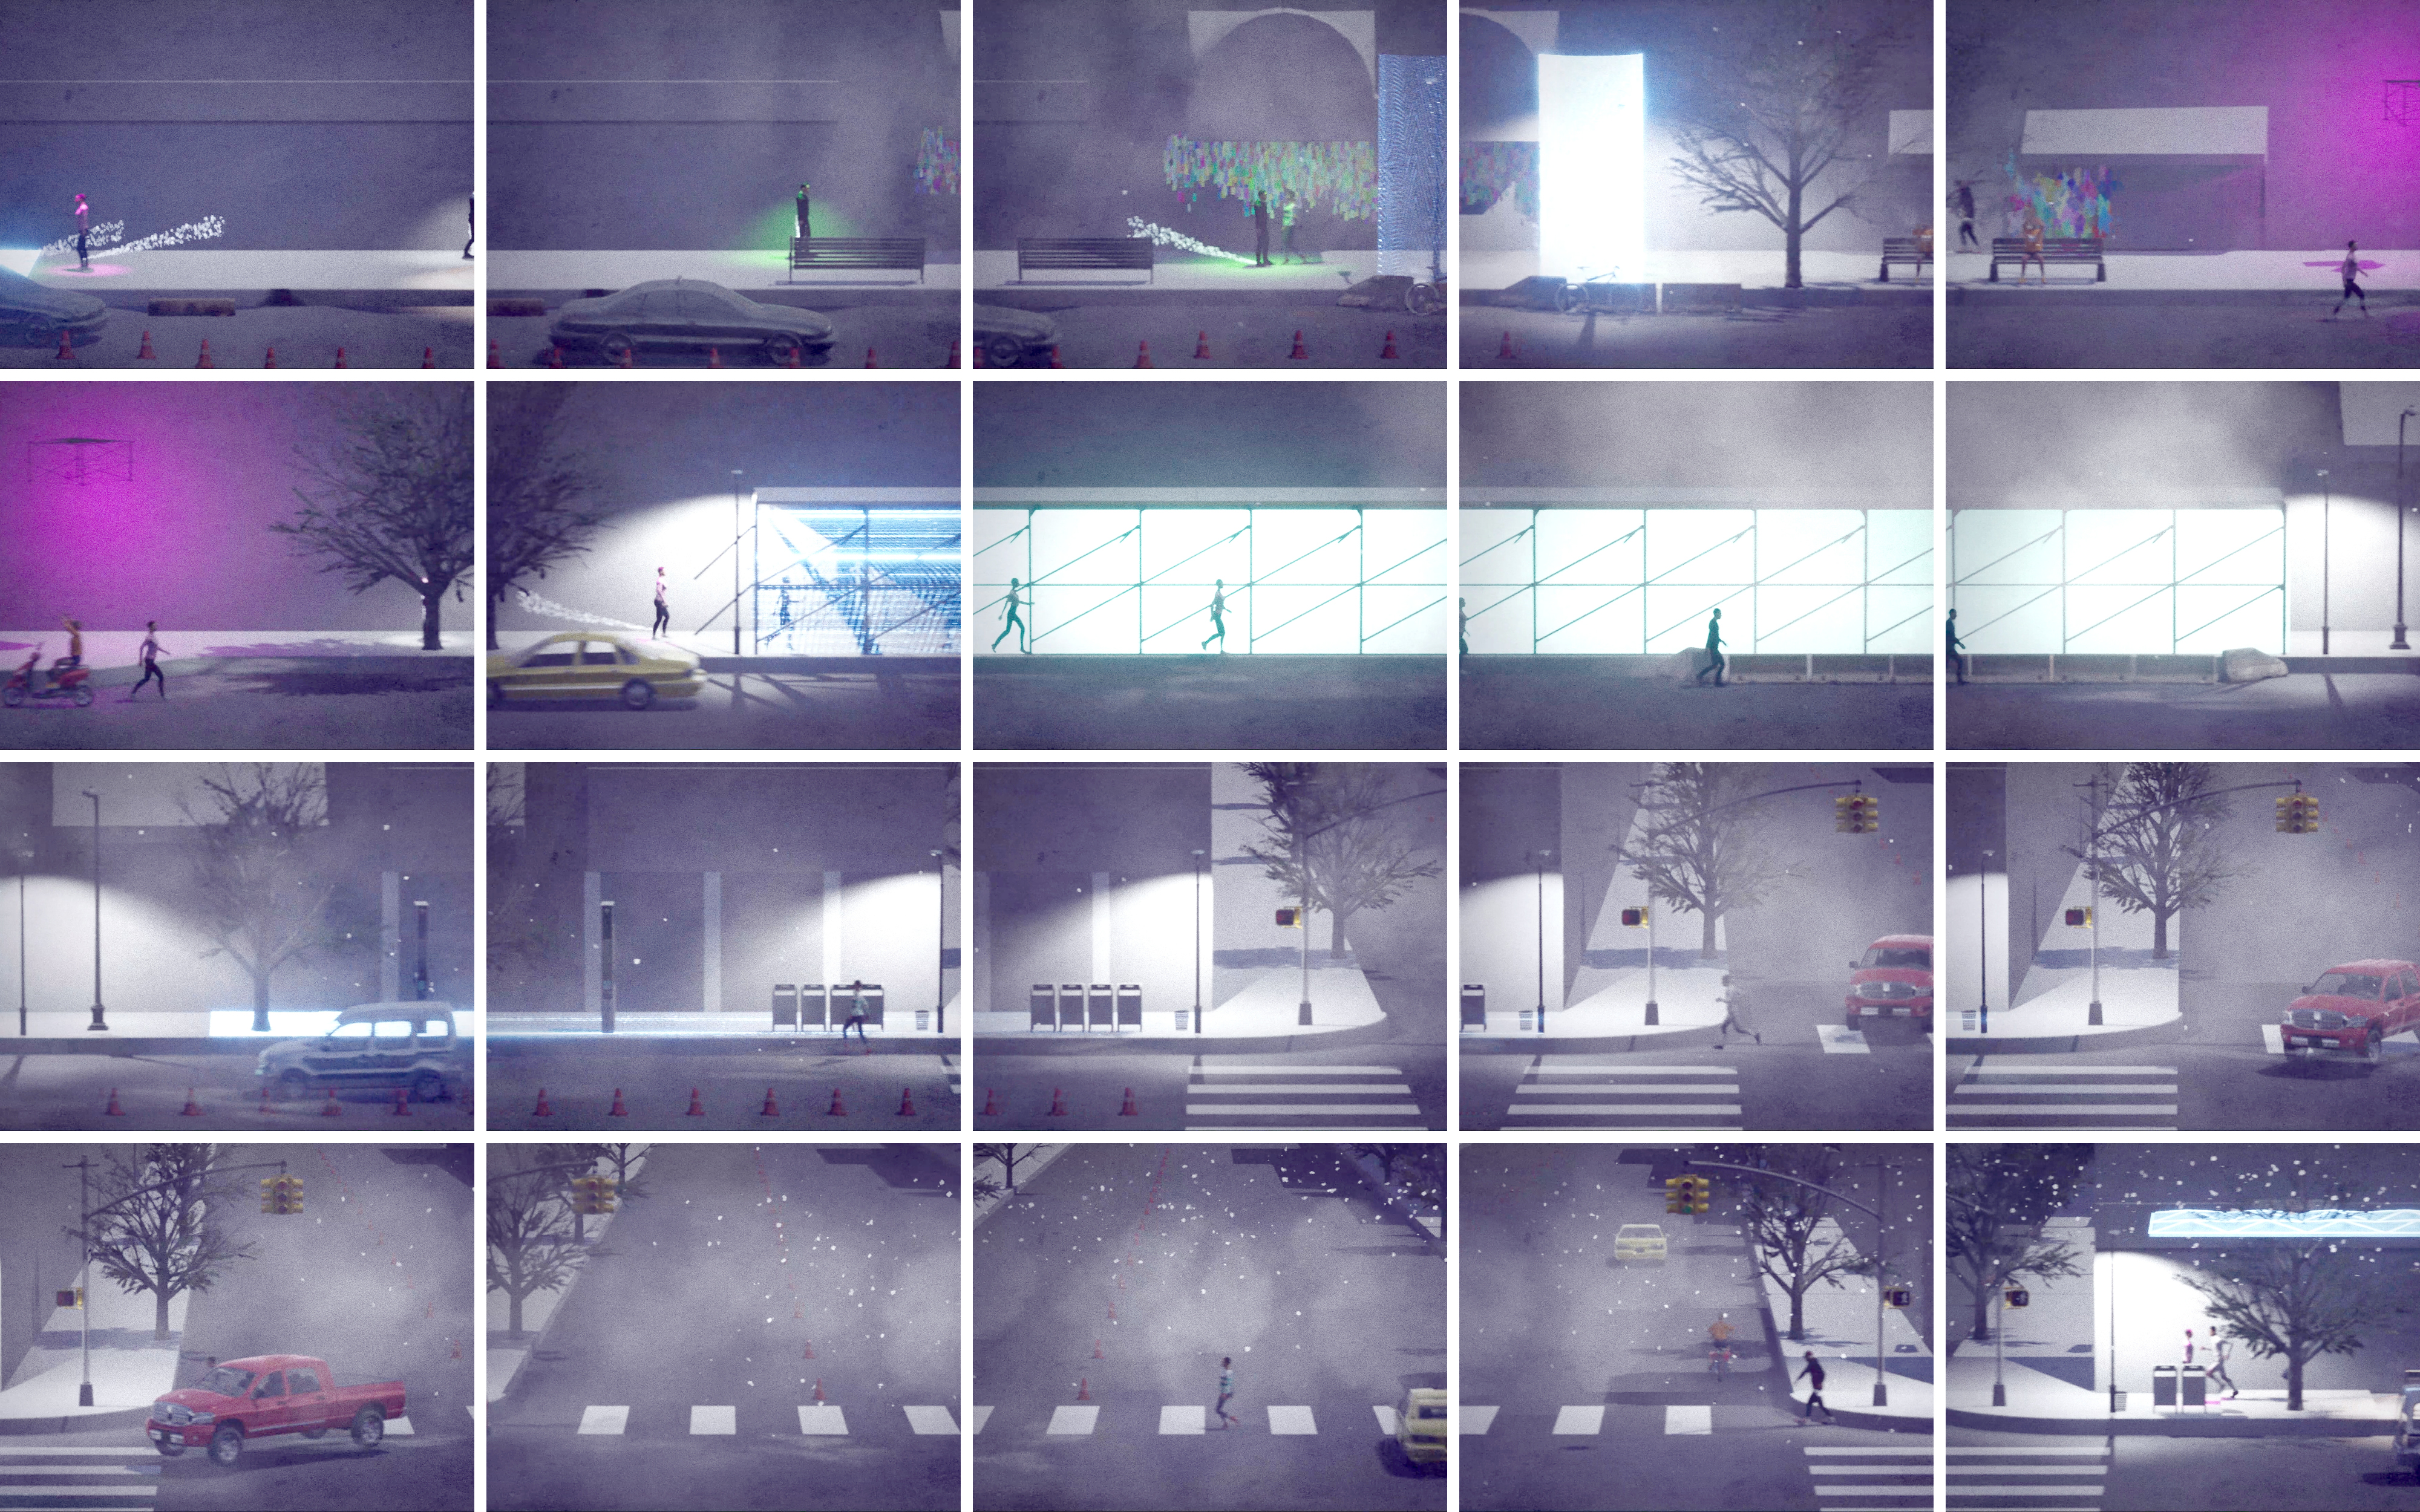 A More Responsive Street. Video frames of street simulation from real-time application showing experiences triggered by pedestrians. Kunal Rajesh Mokasdar and Elie Zeinoun.